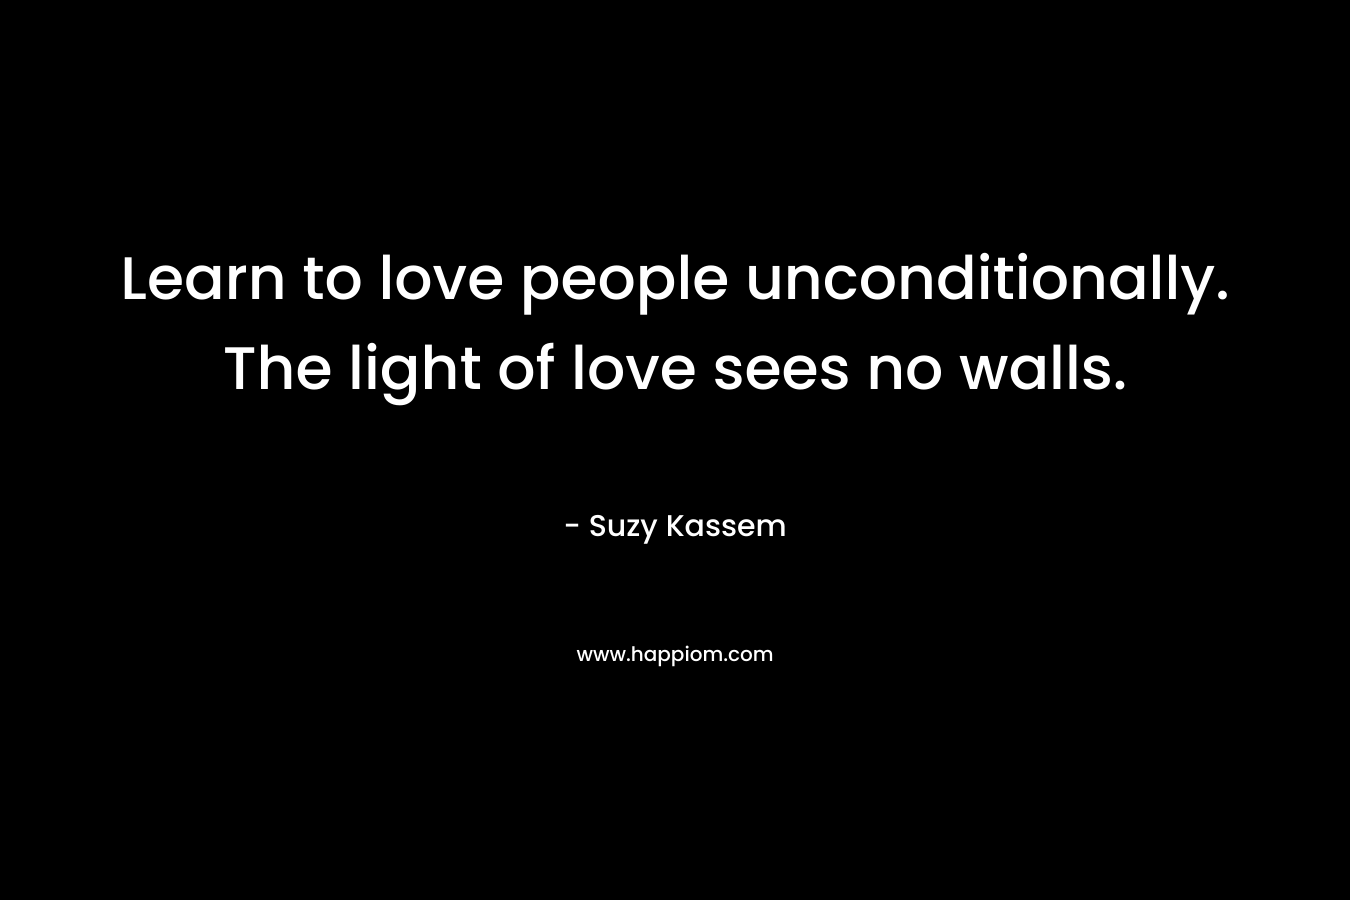 Learn to love people unconditionally. The light of love sees no walls.